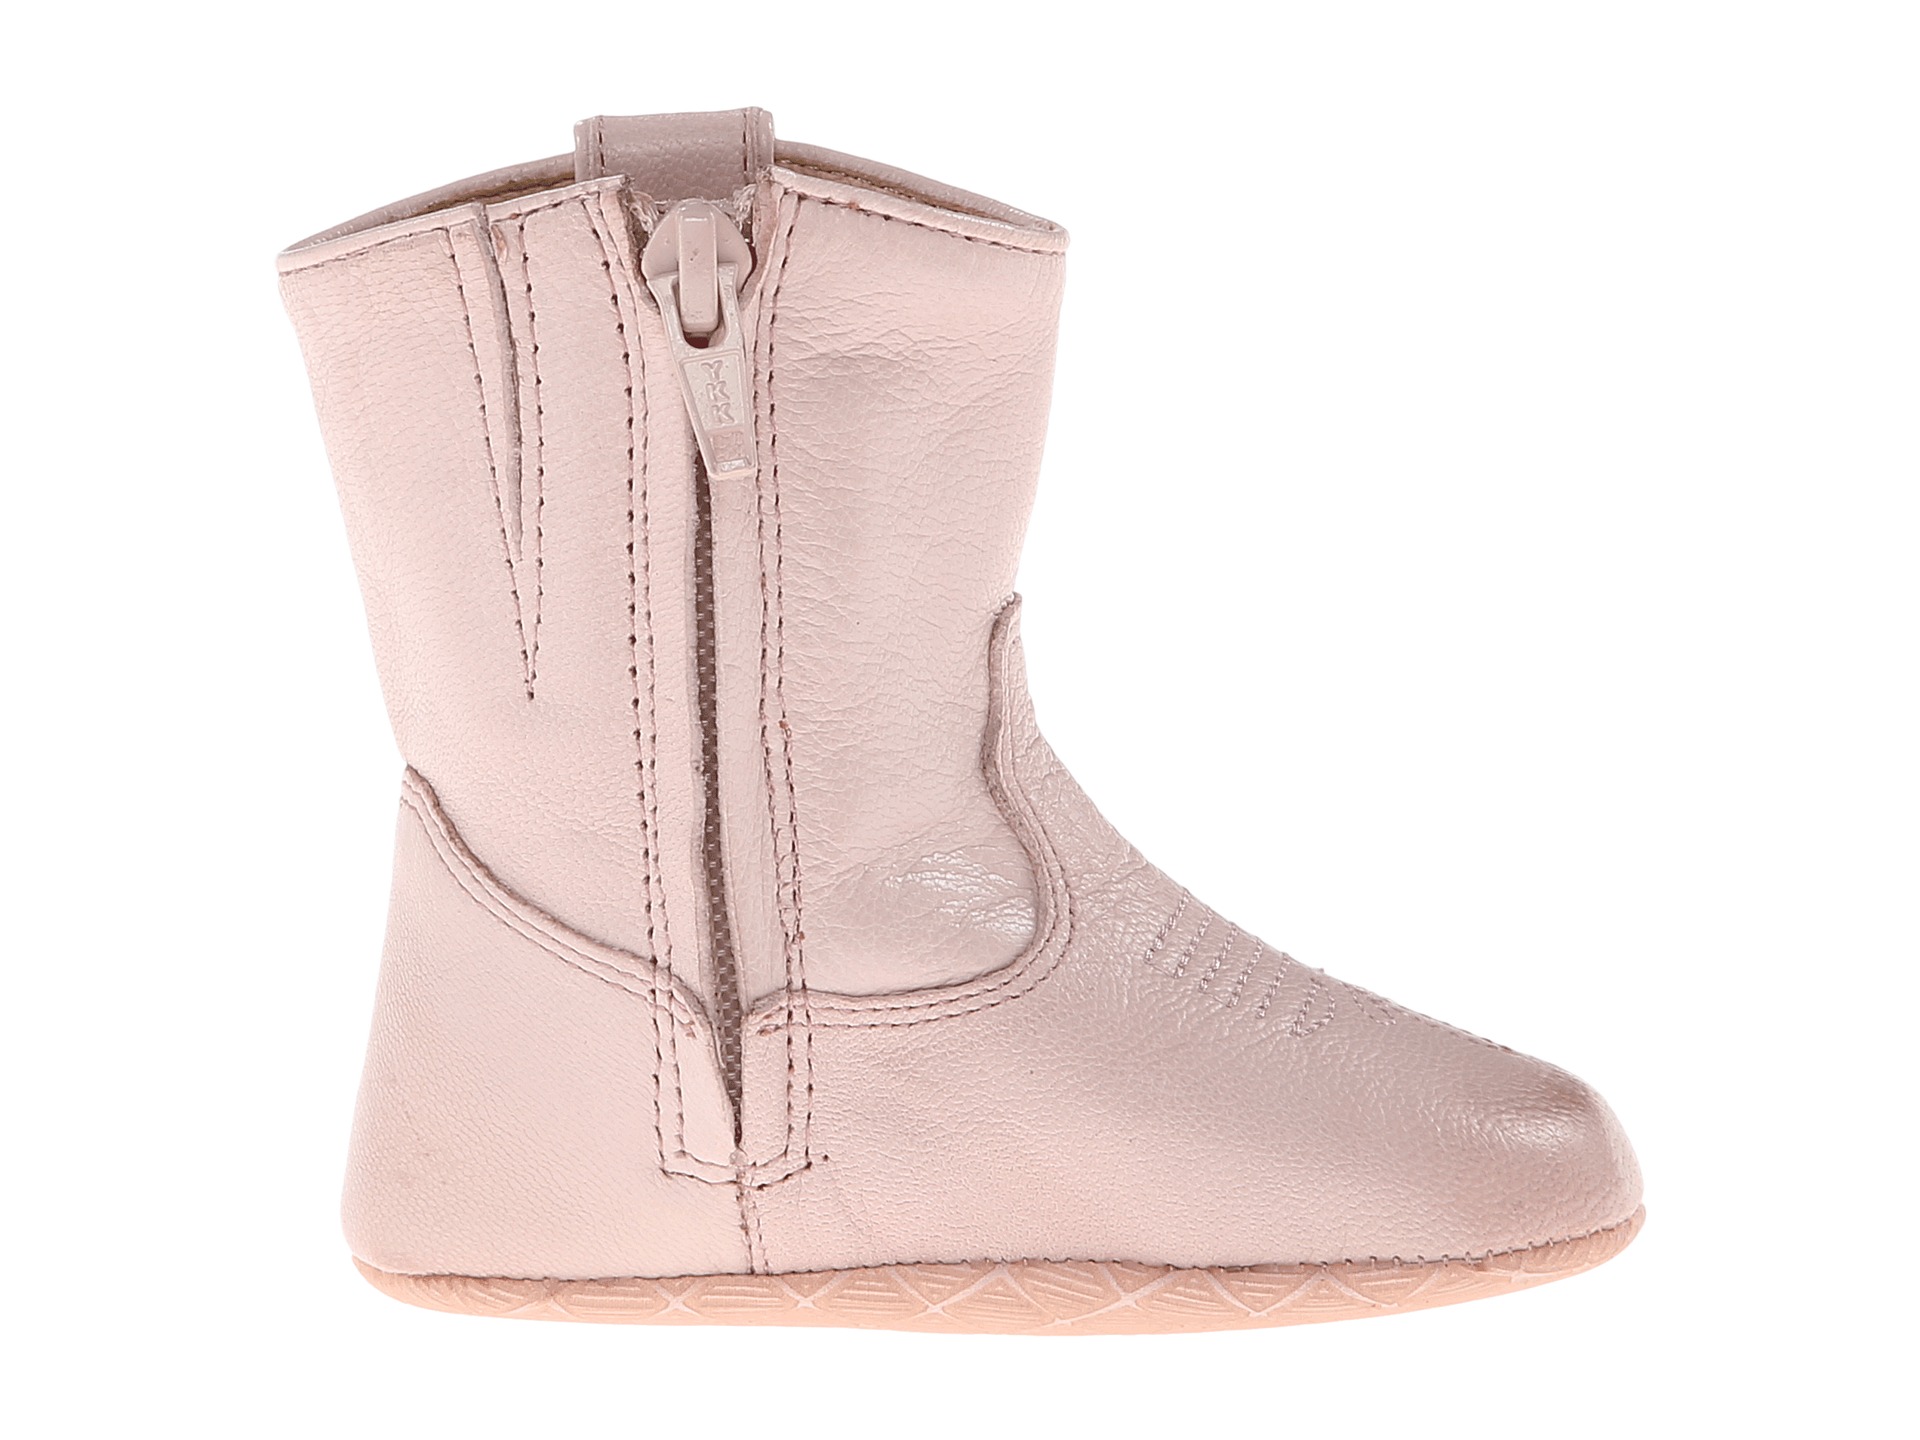 Frye Kids Rodeo Bootie (Infant/Toddler) Light Pink 2 - Zappos.com Free ...